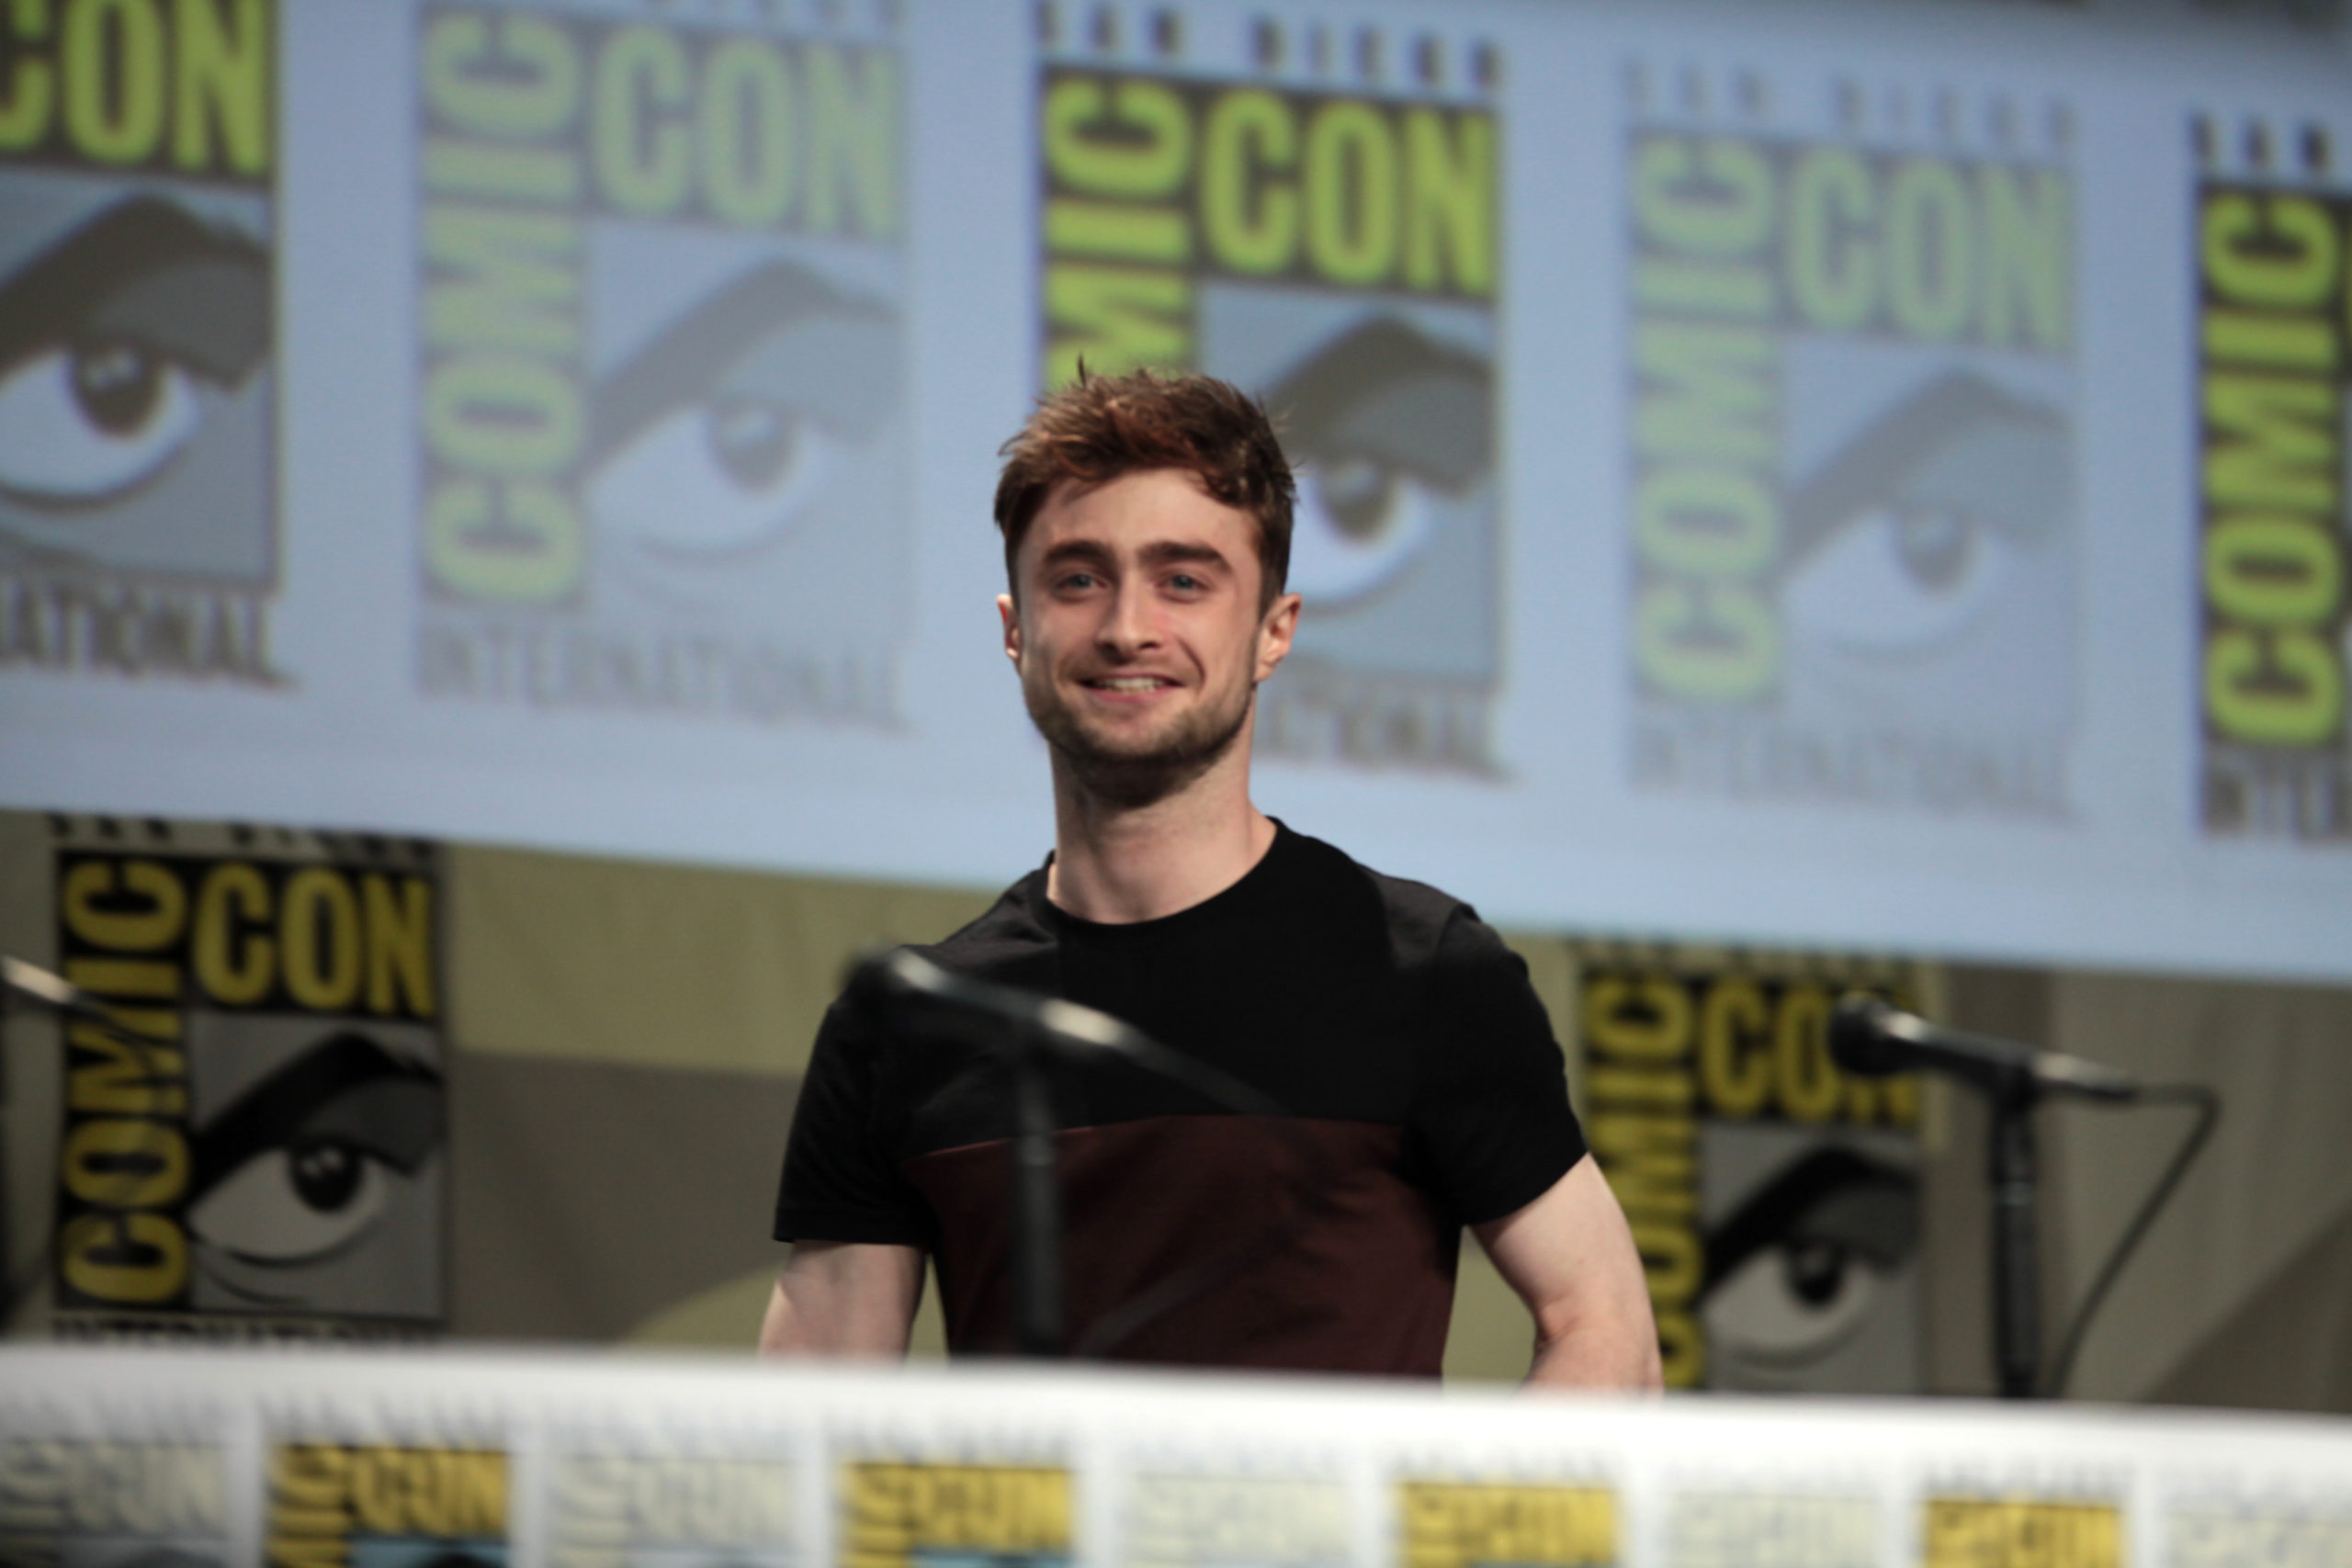 The actor Daniel Radcliffe is speaking on a panel at a Comic Con event.